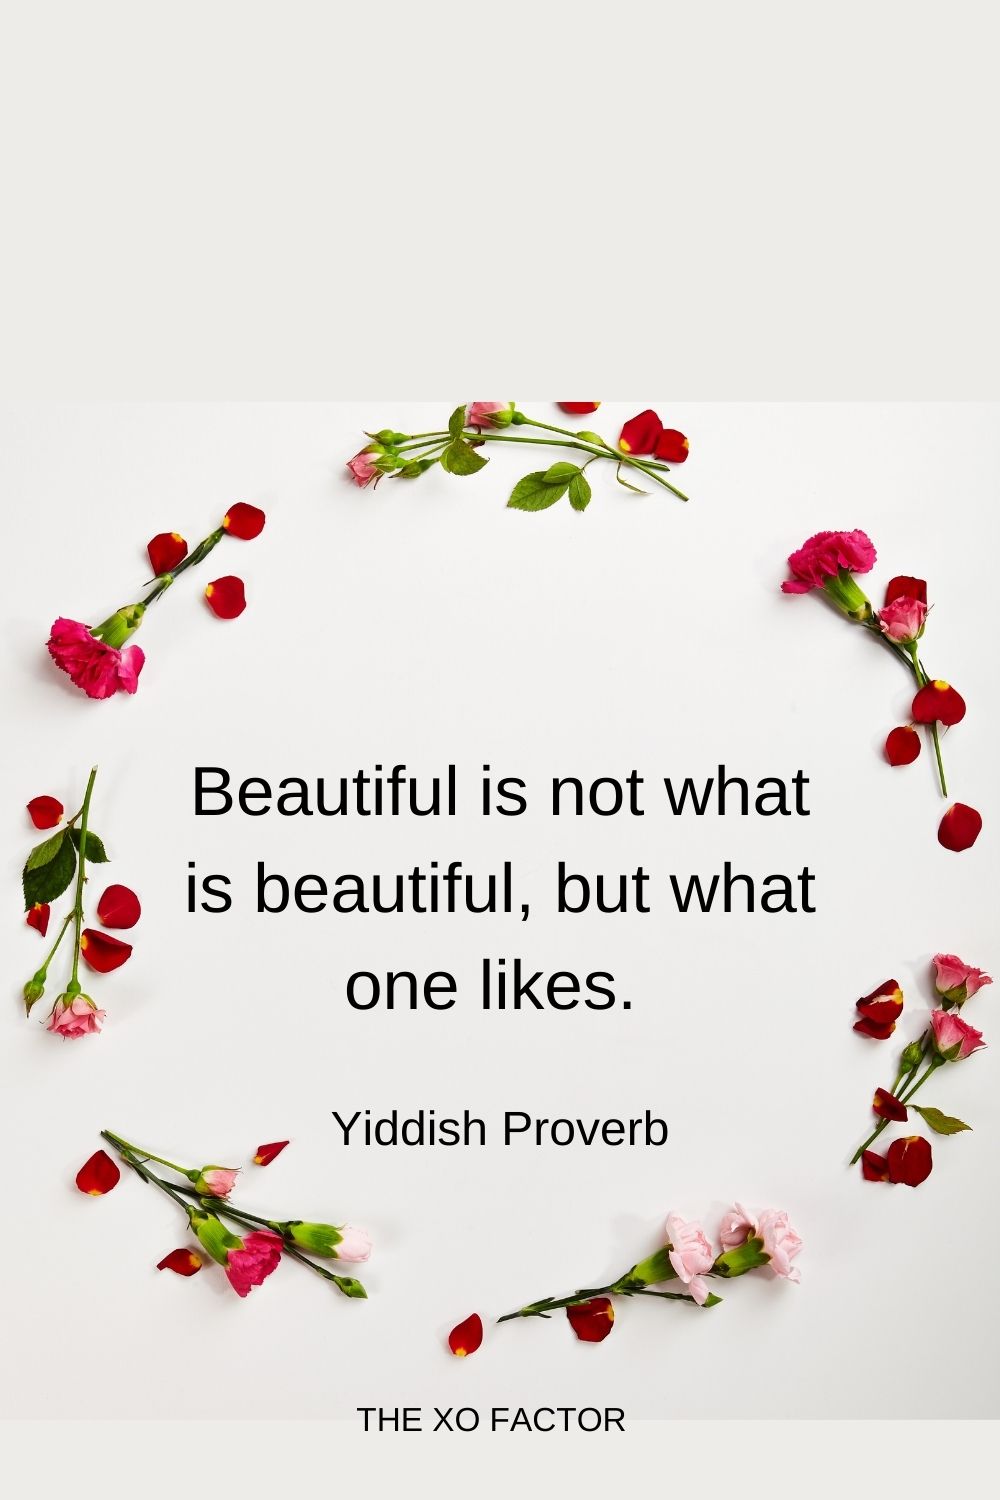 Beautiful is not what is beautiful, but what one likes. Yiddish Proverb